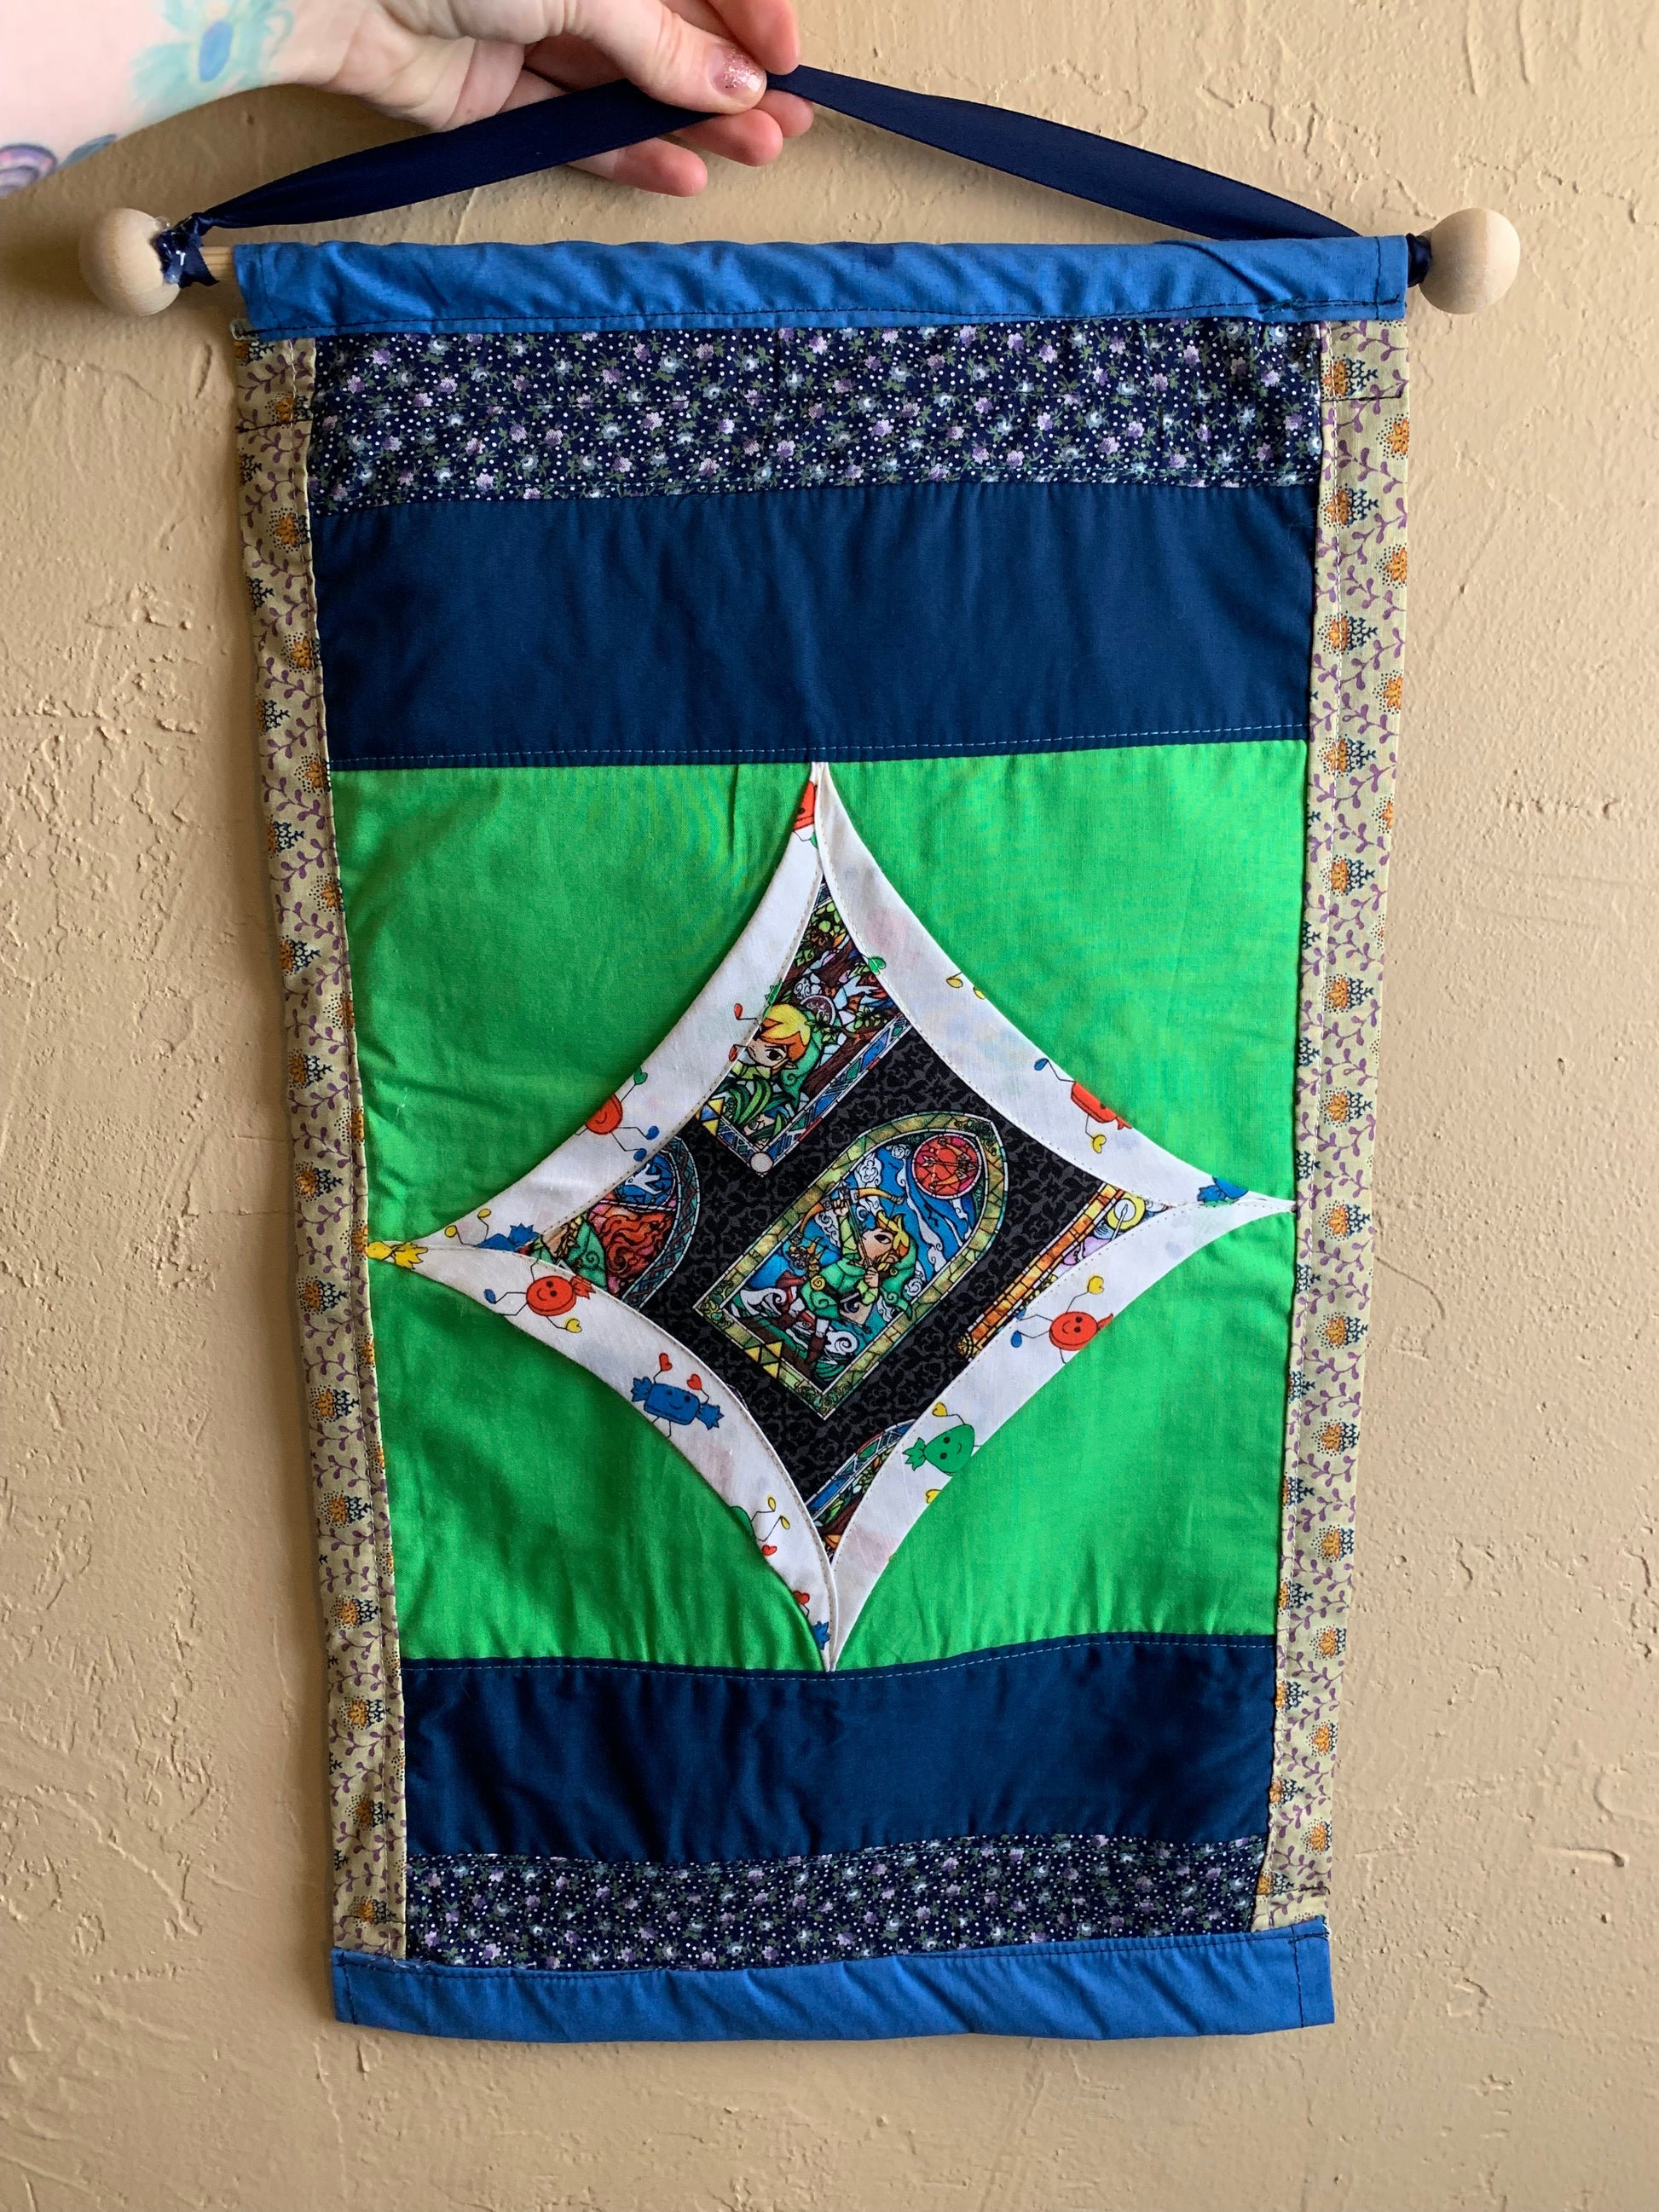 zelda wall hanging is placed against a wall